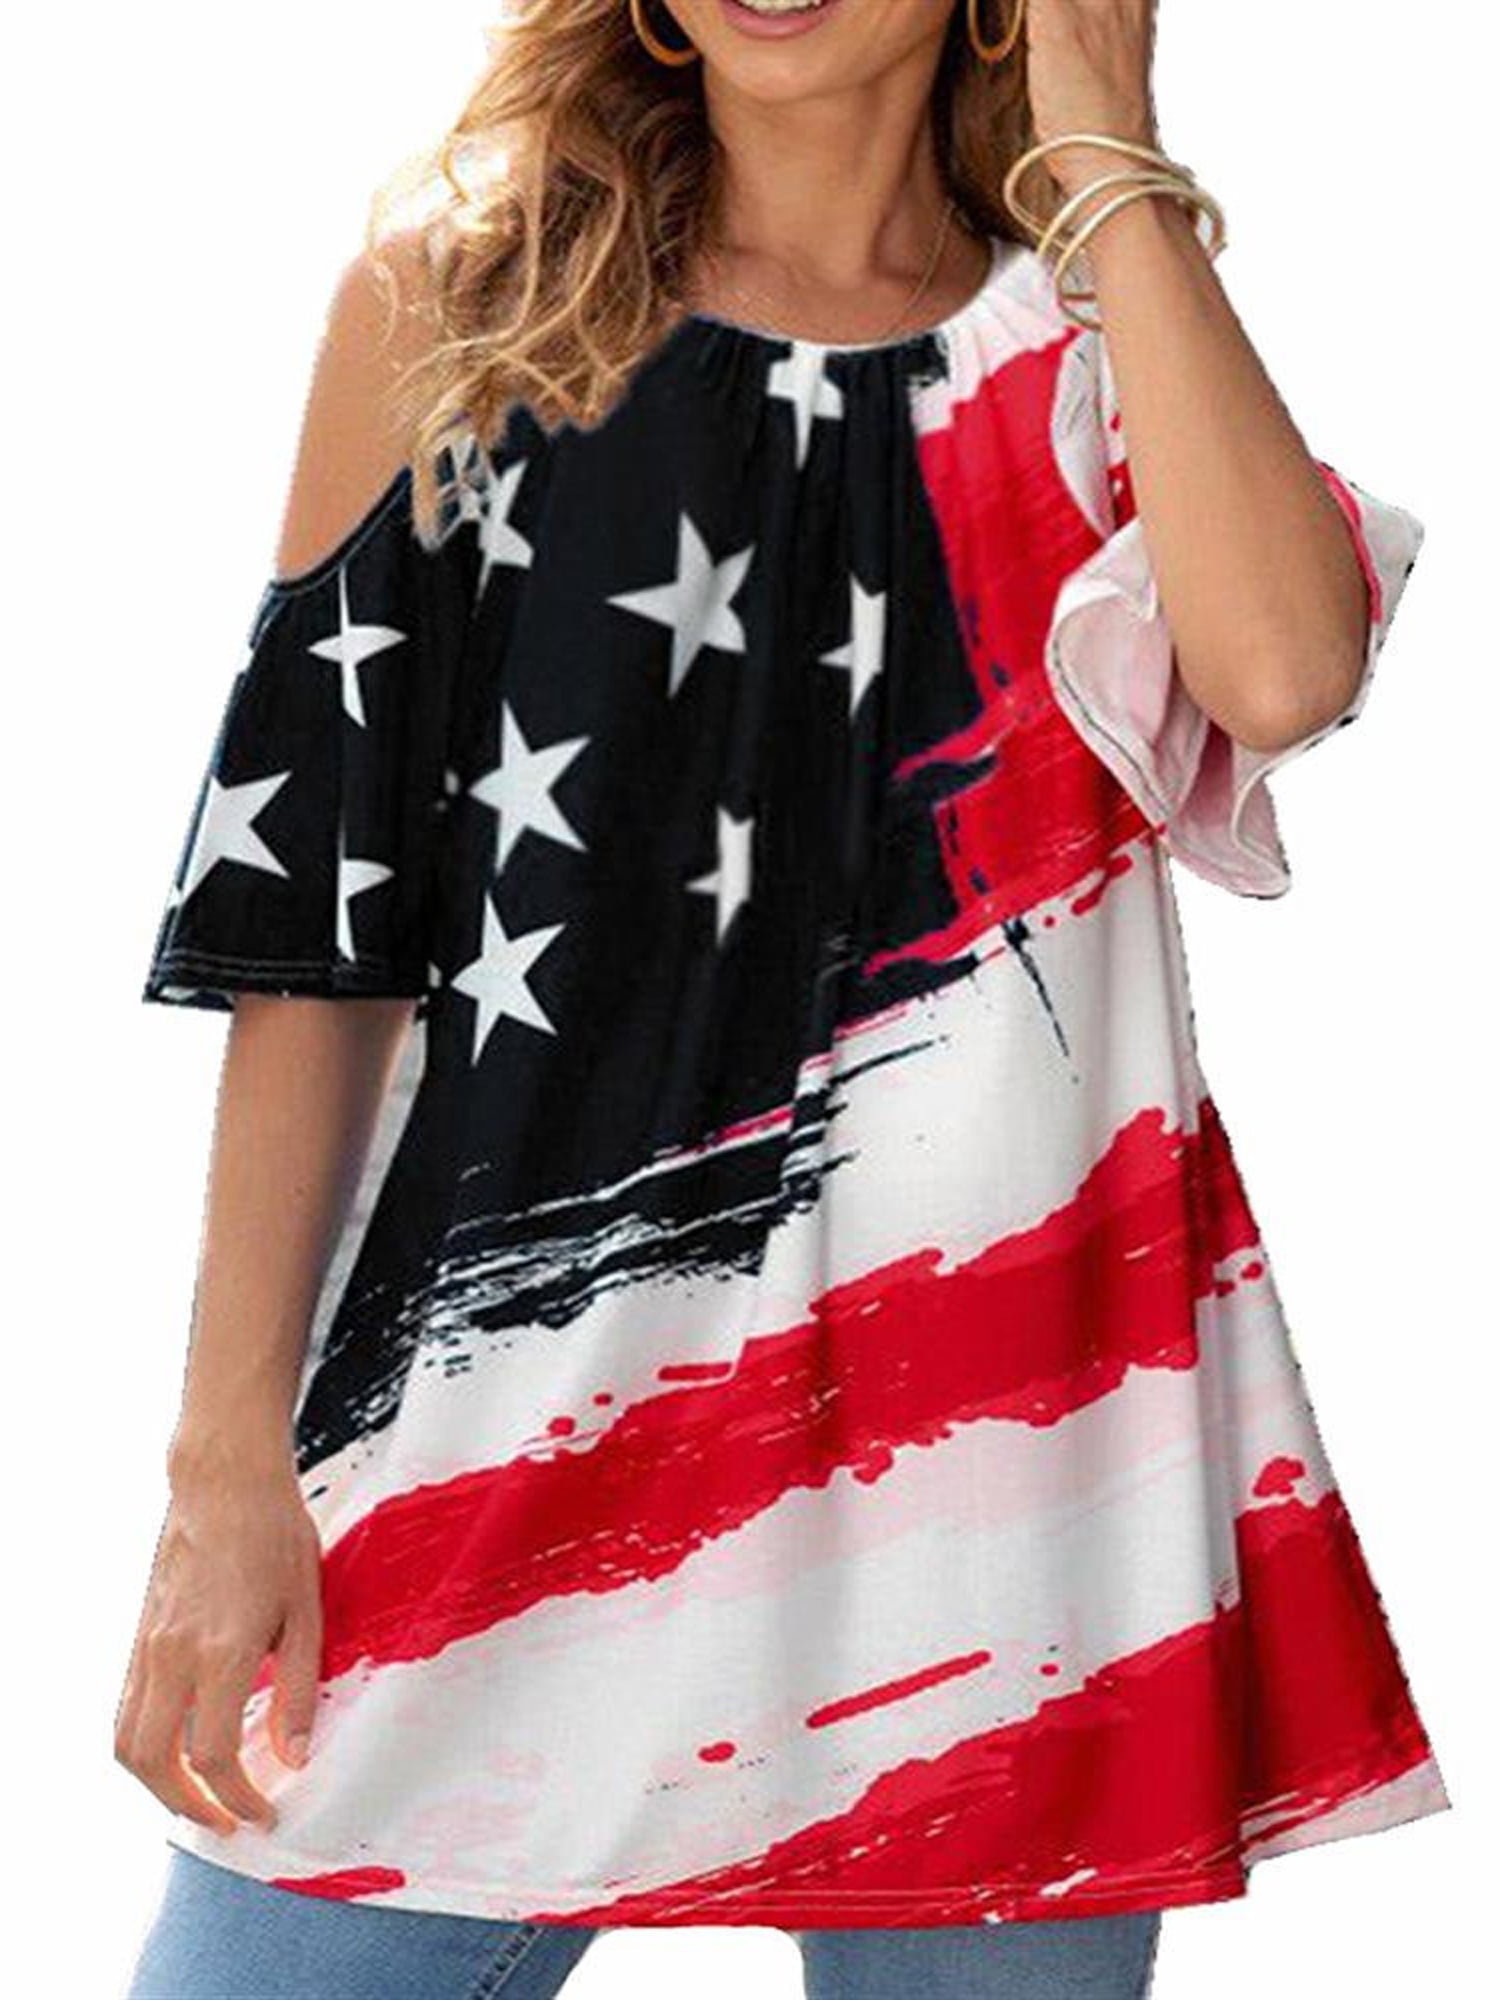 Midress Women Plus Size Casual Flag Star Print Off Shoulder Slings Sleeve Top T-Shirt Tank Tops Hollow Out Tee Tops Blouse T-Shirt